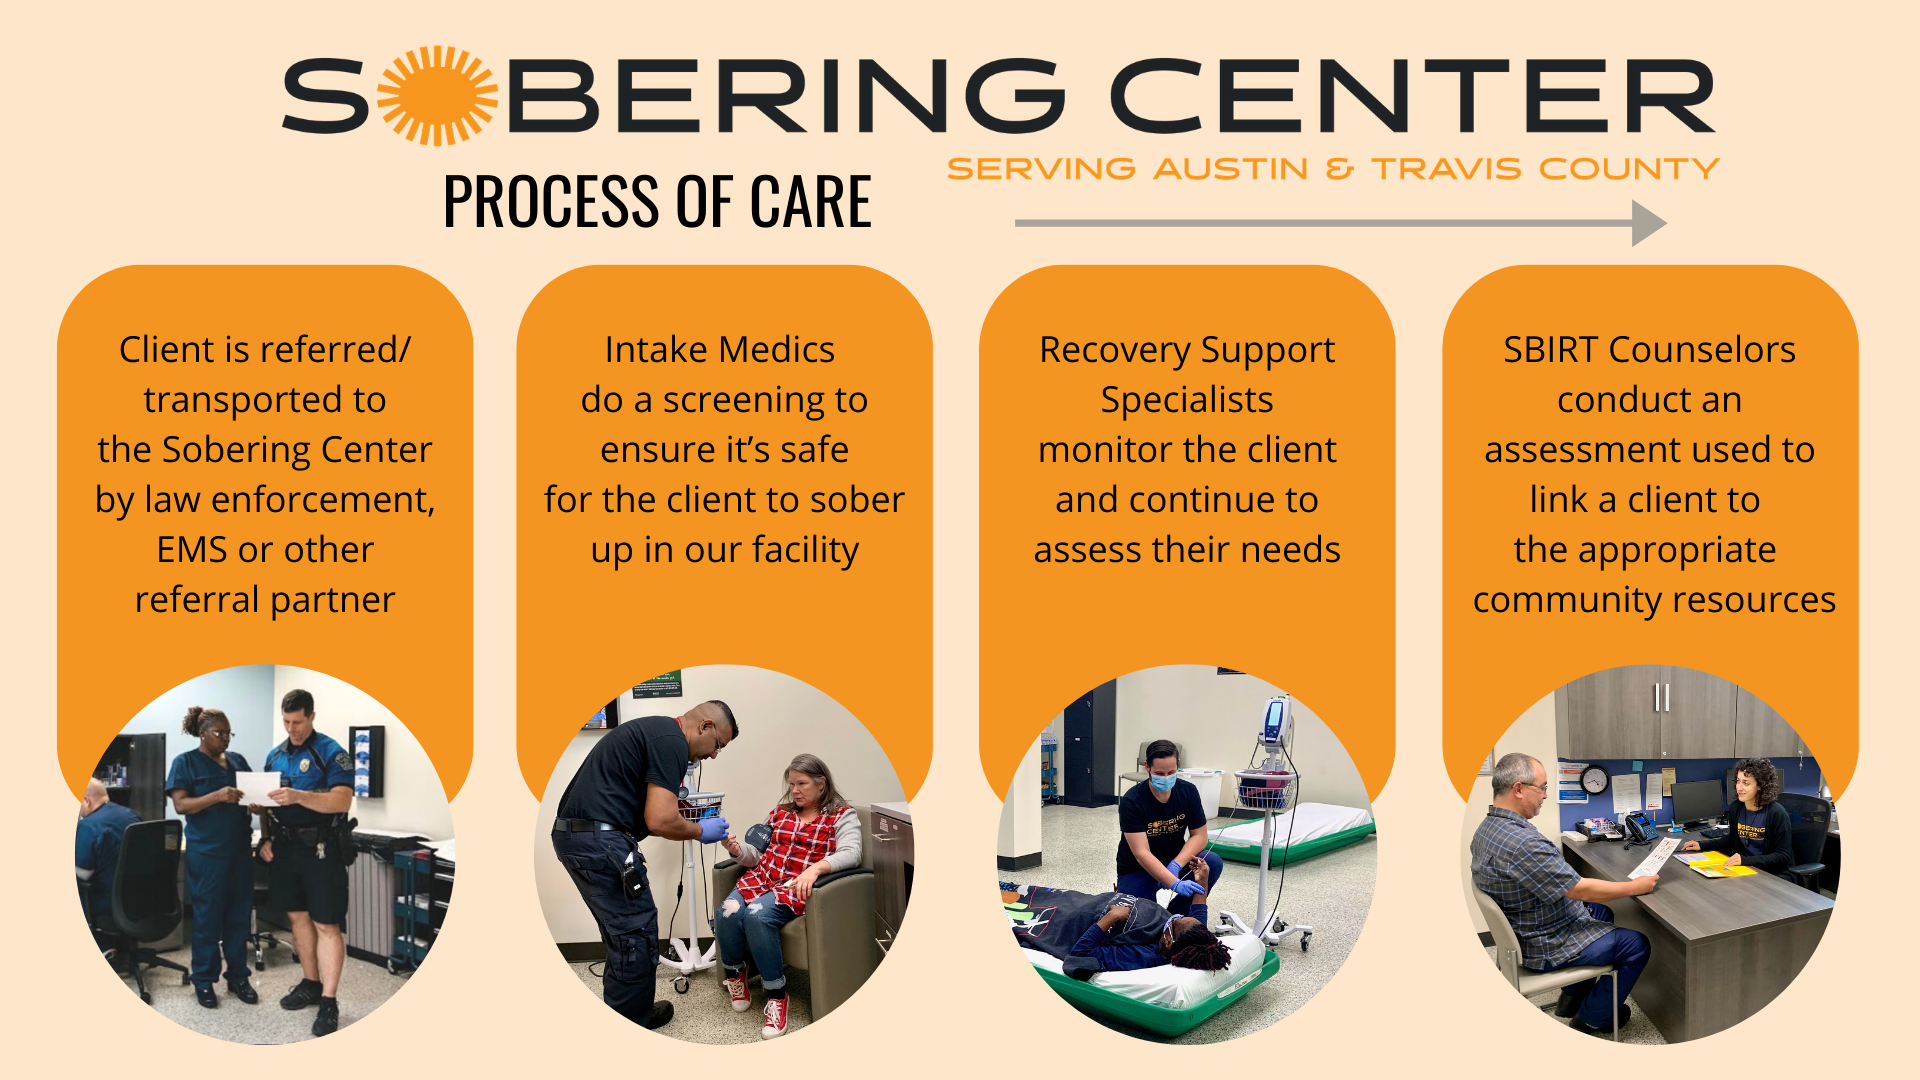 Services - The Sobering Center